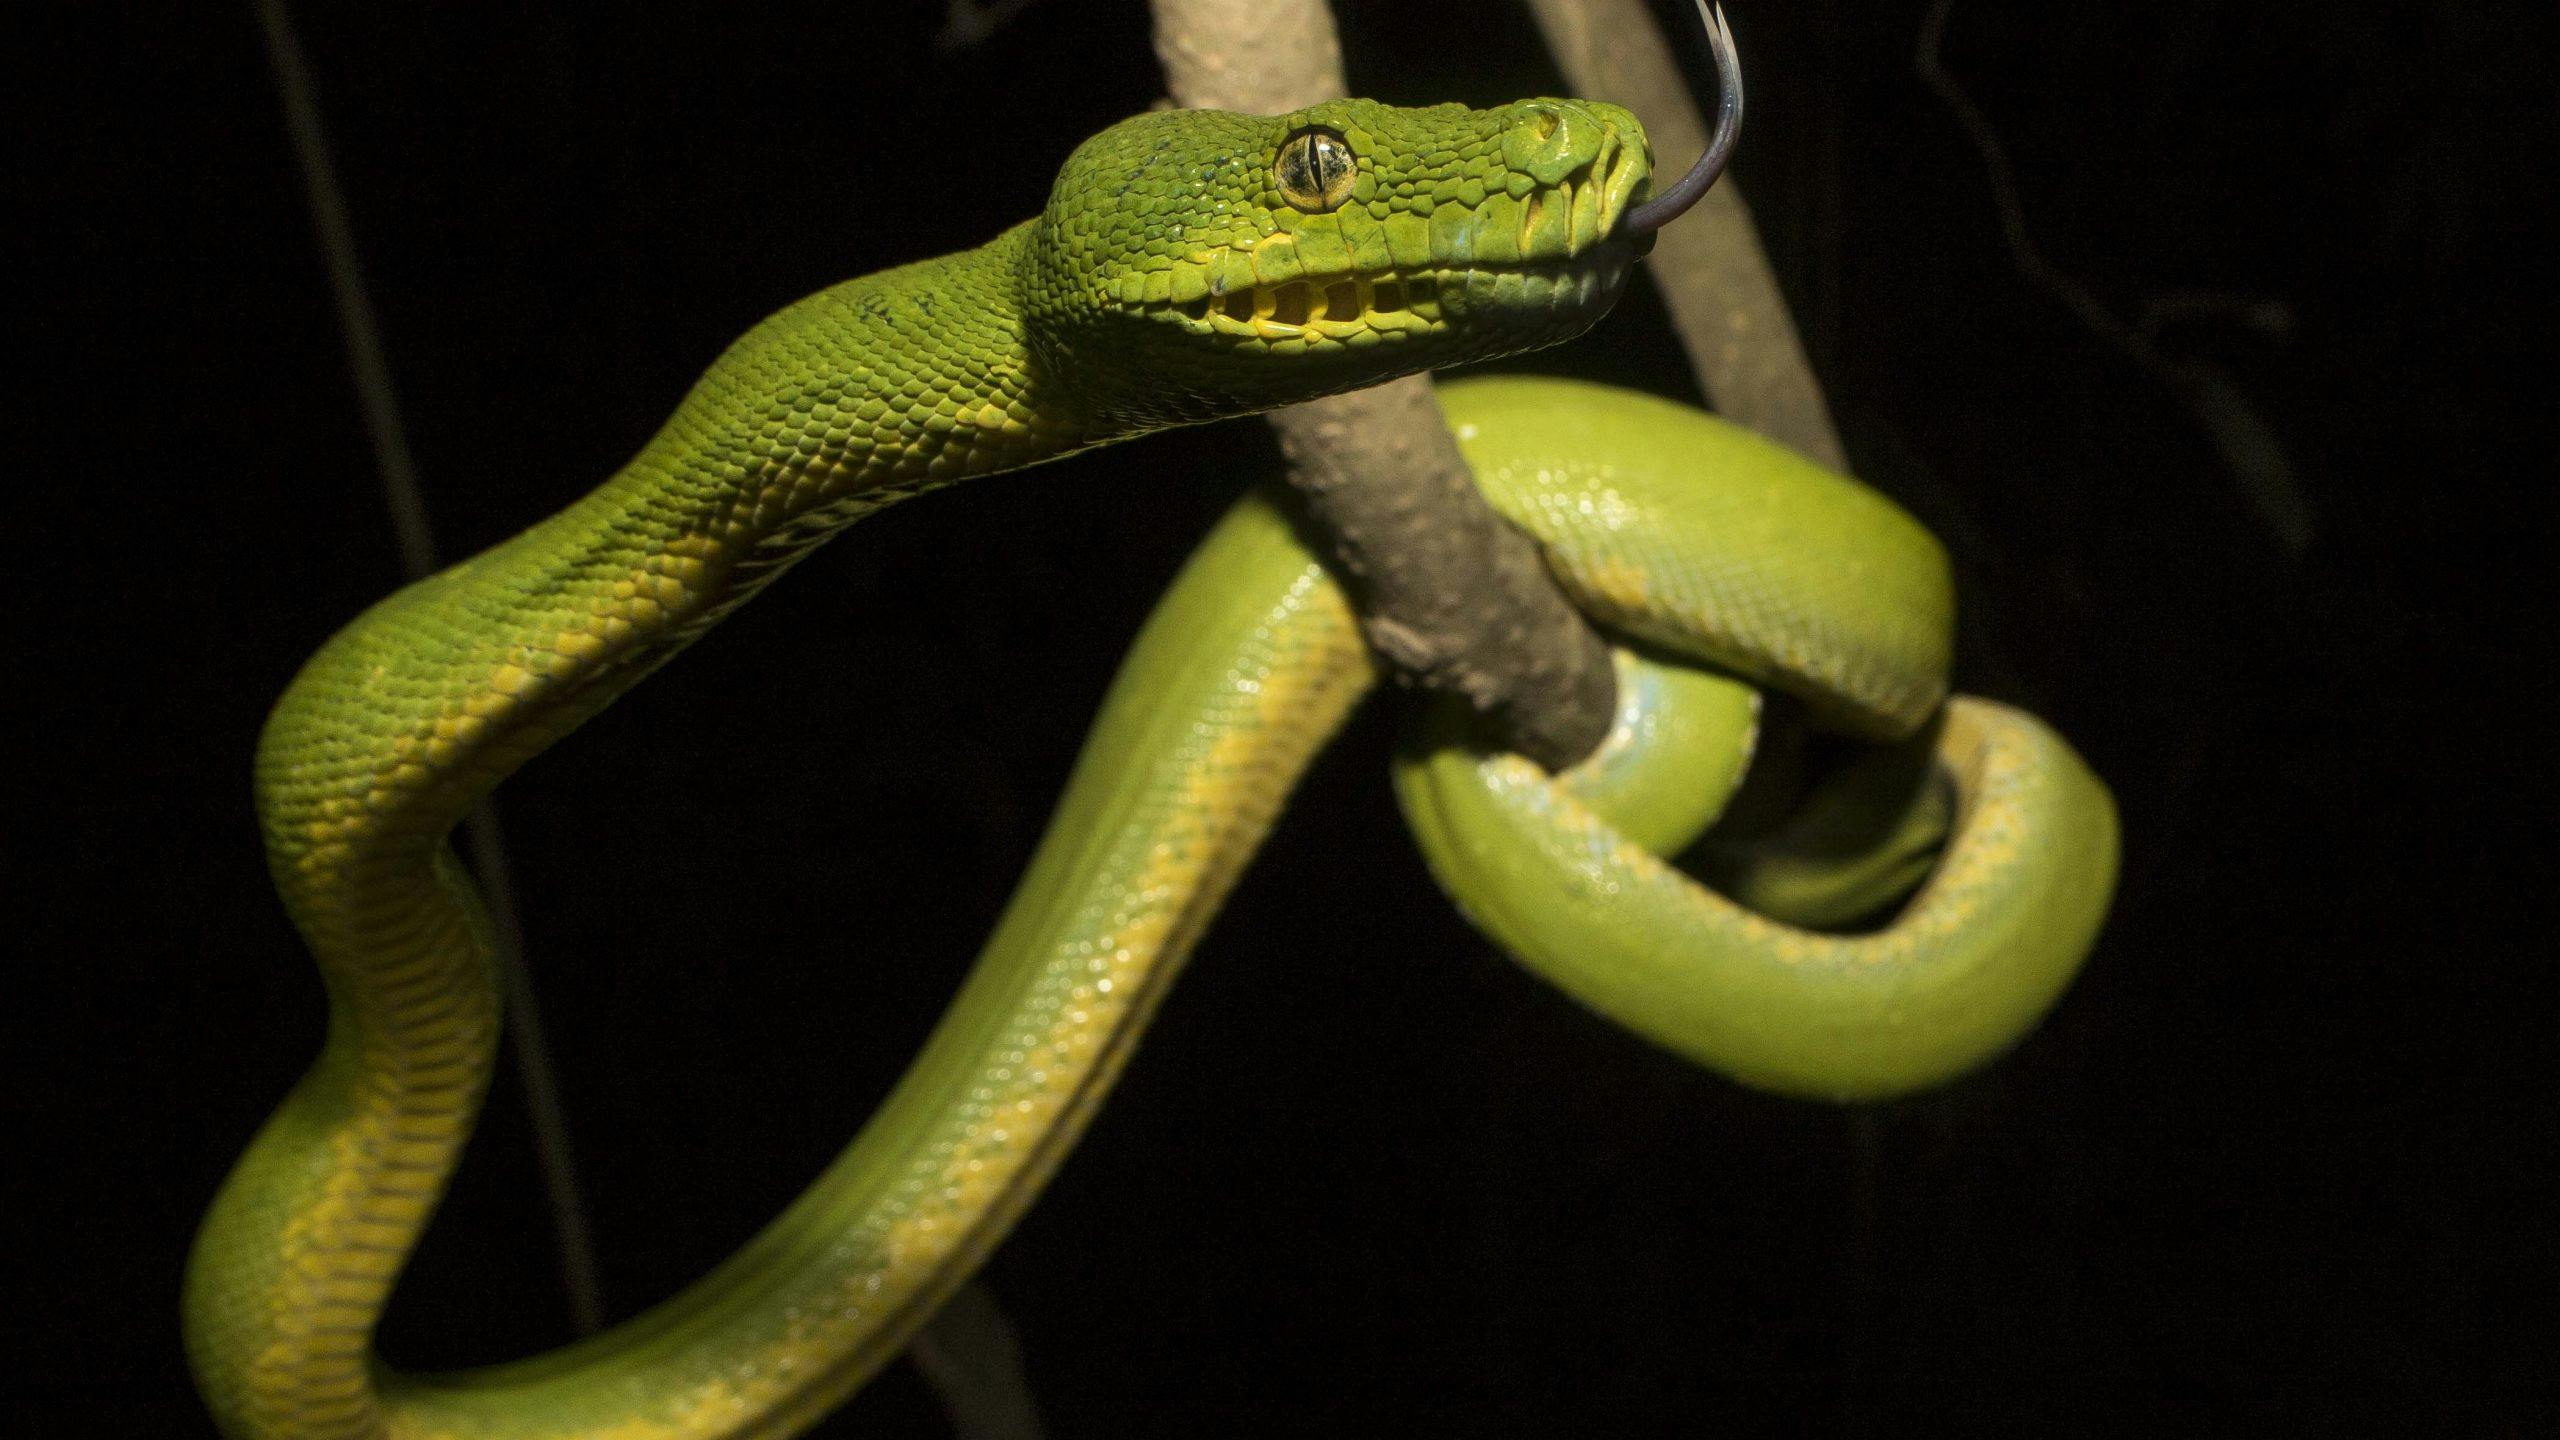 green snake looped on a tree branch in front of a black background